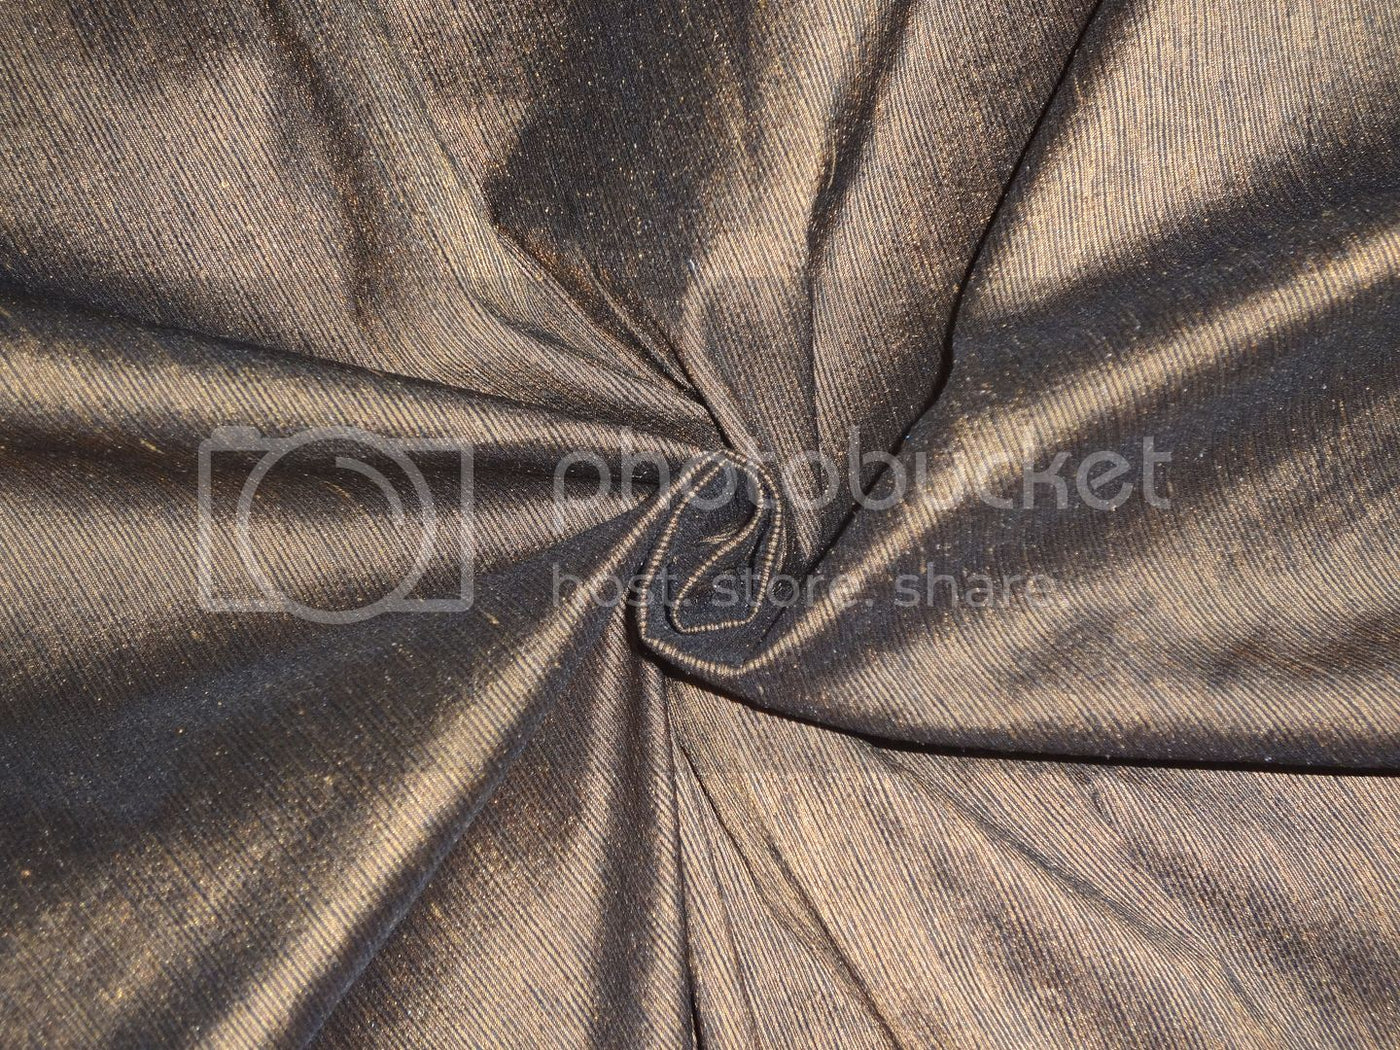 100% Pure SILK Dupioni FABRIC Great 2 ply silk Shades of Brown color 54&quot; wide